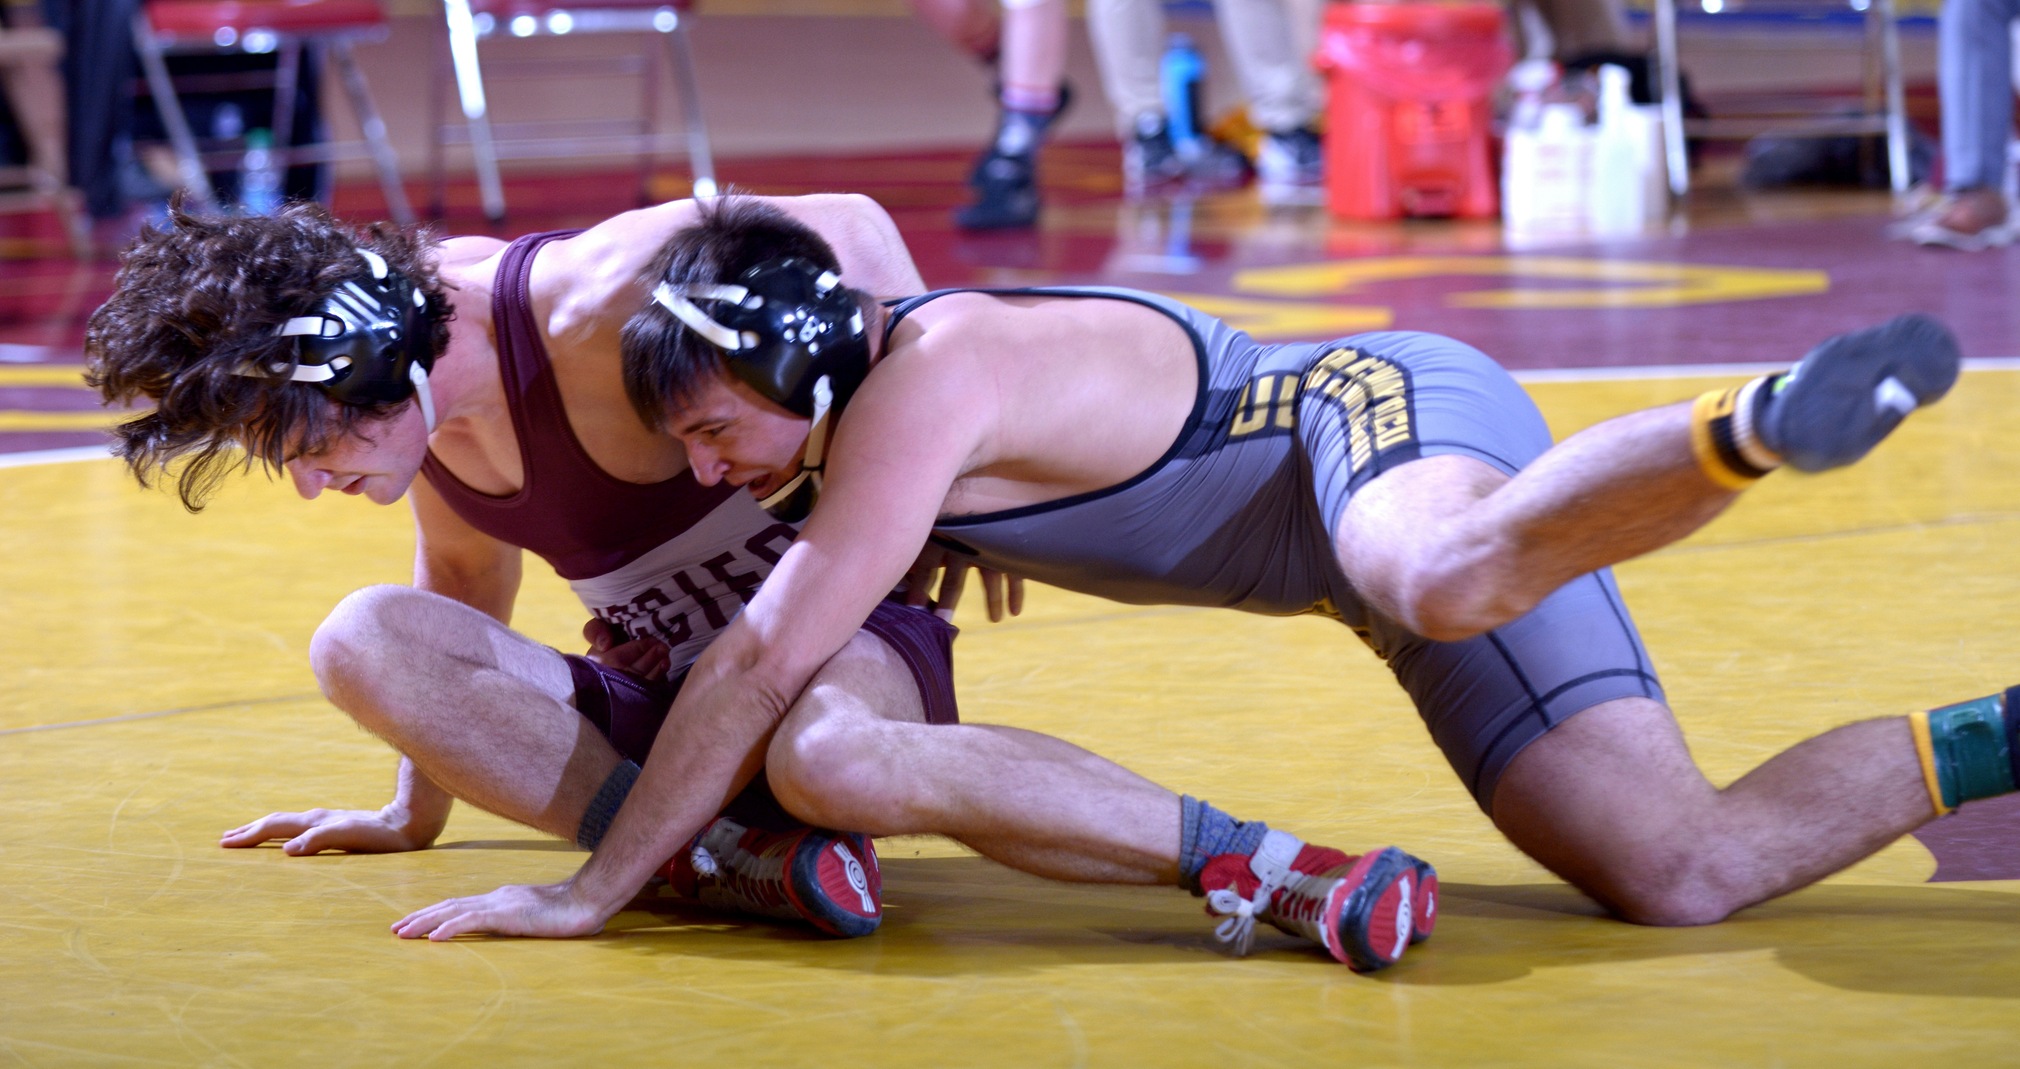 Kody Azarian qualified for nationals with his second-place regional finish at 141 pounds.